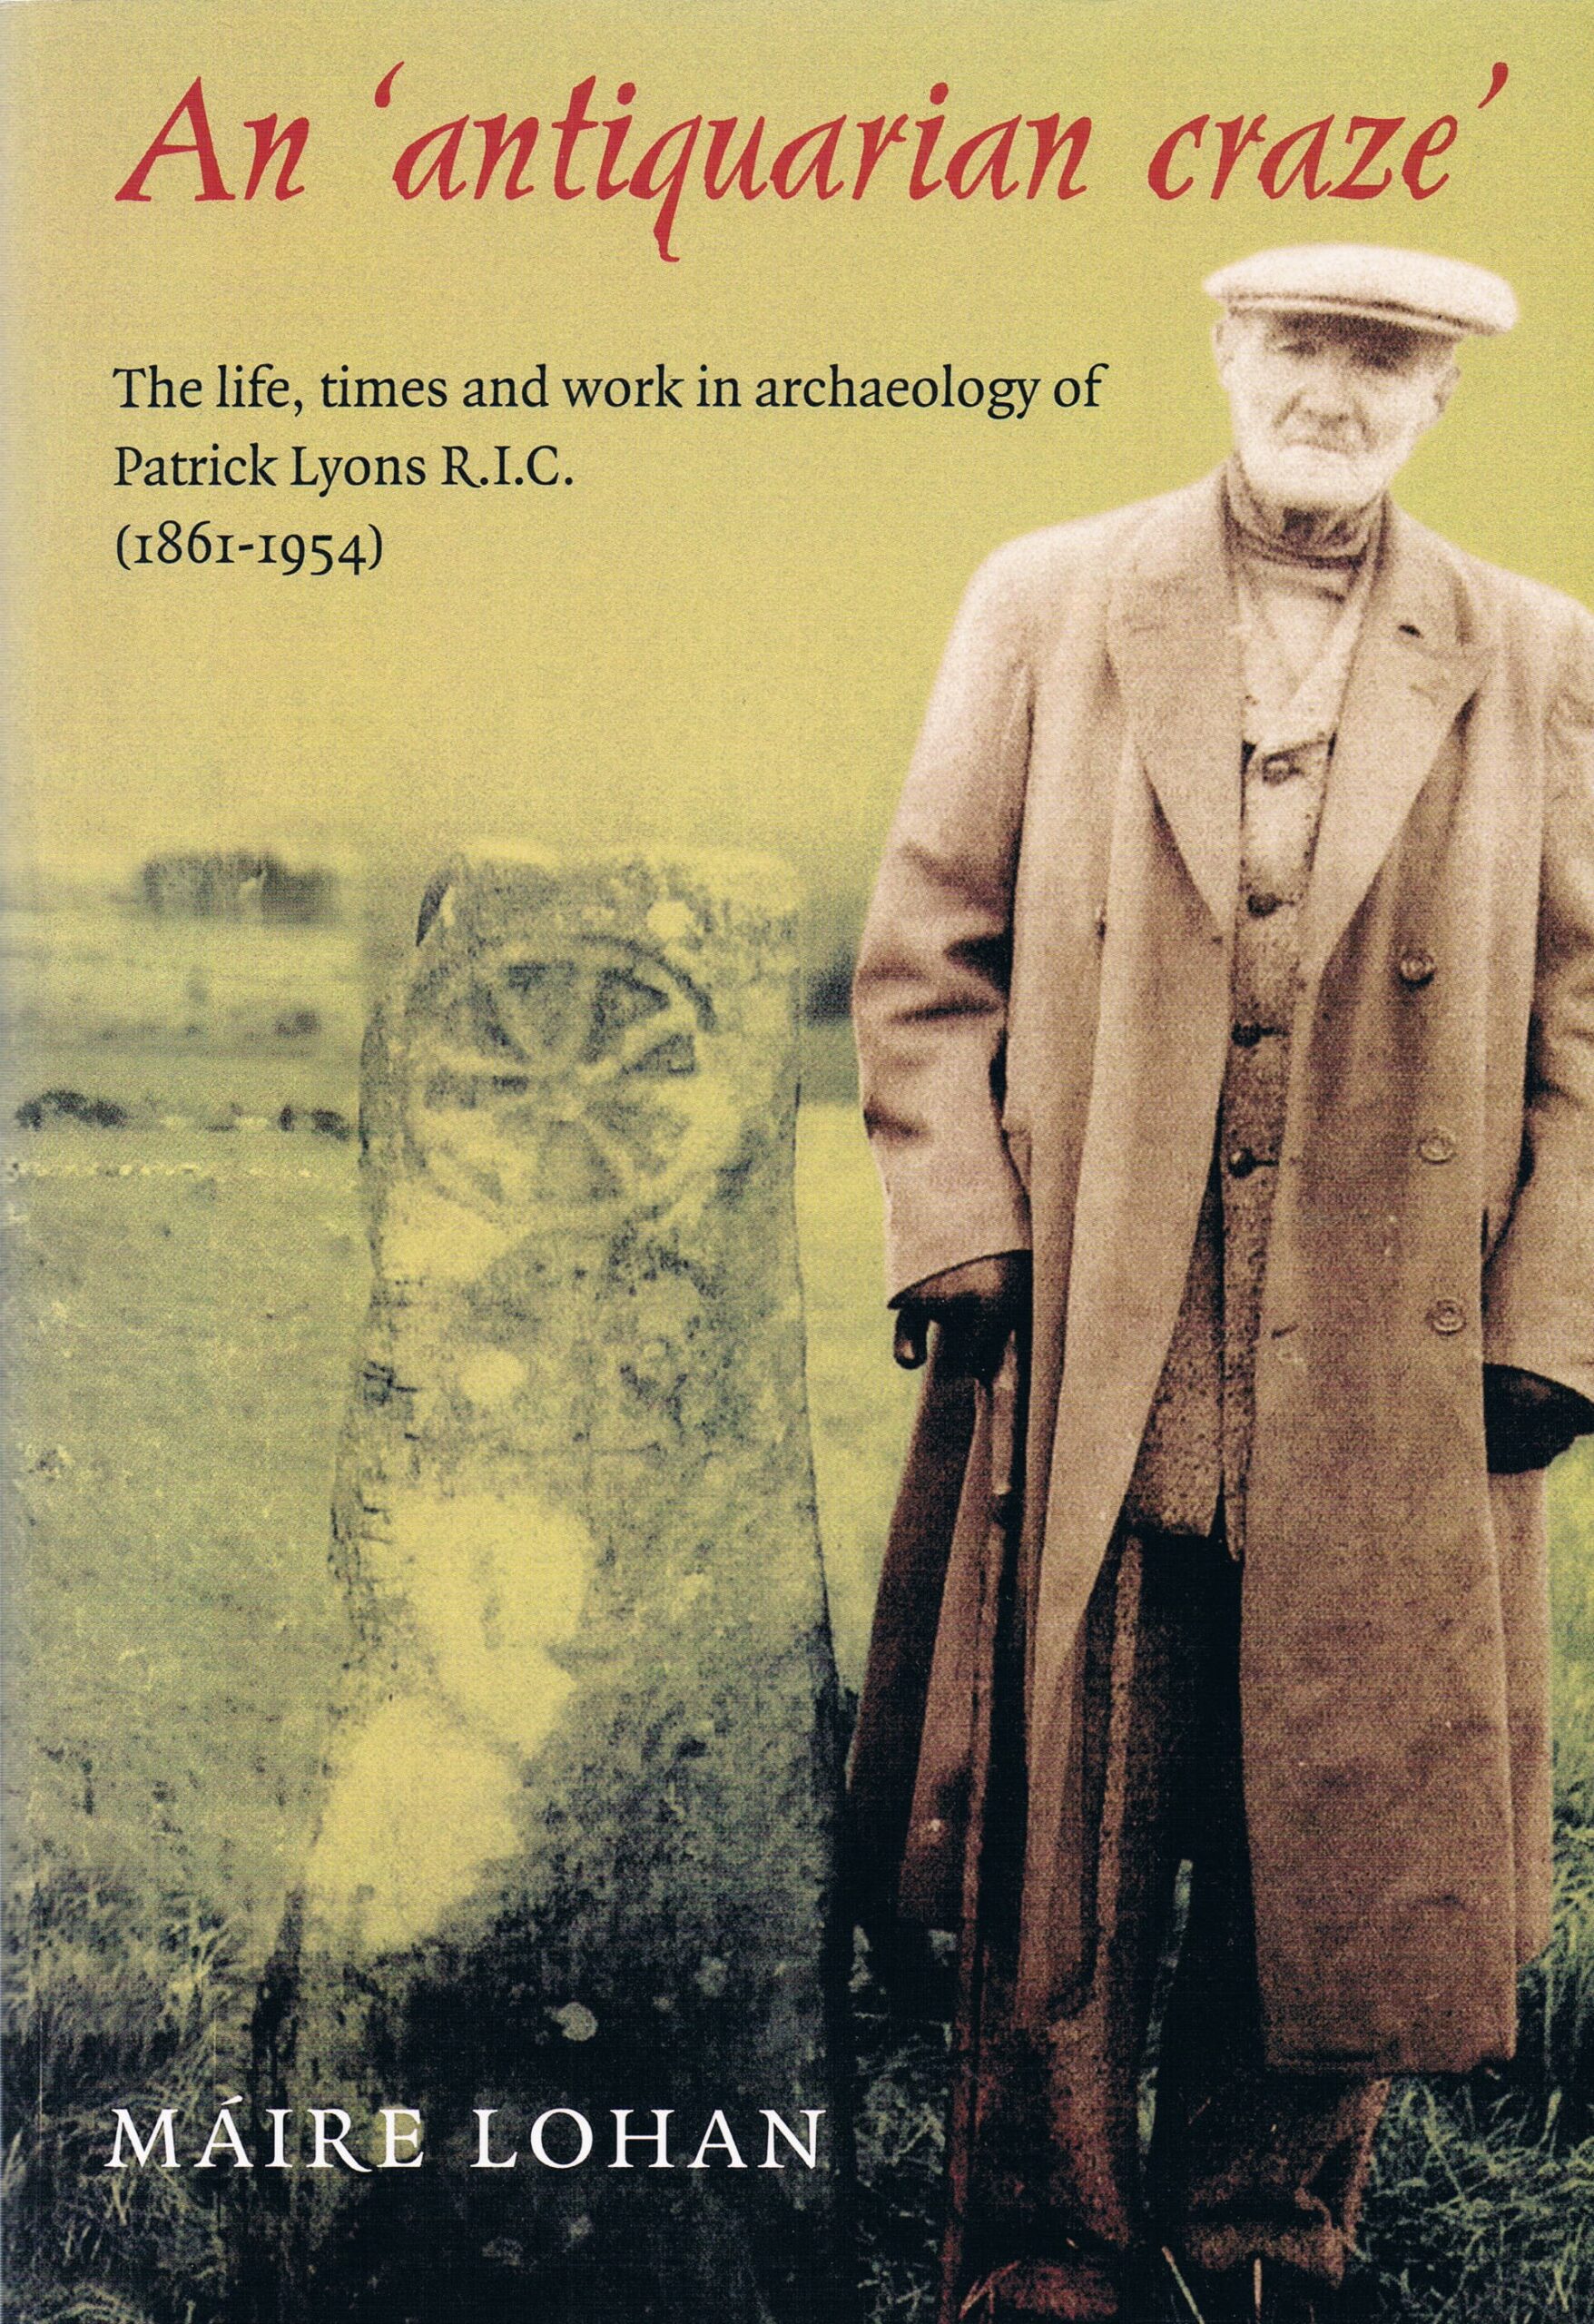 An ‘Antiquarian Craze’ The Life, Times and Work in Archaeology of Patrick Lyons R.I.C. by Máire Lohan